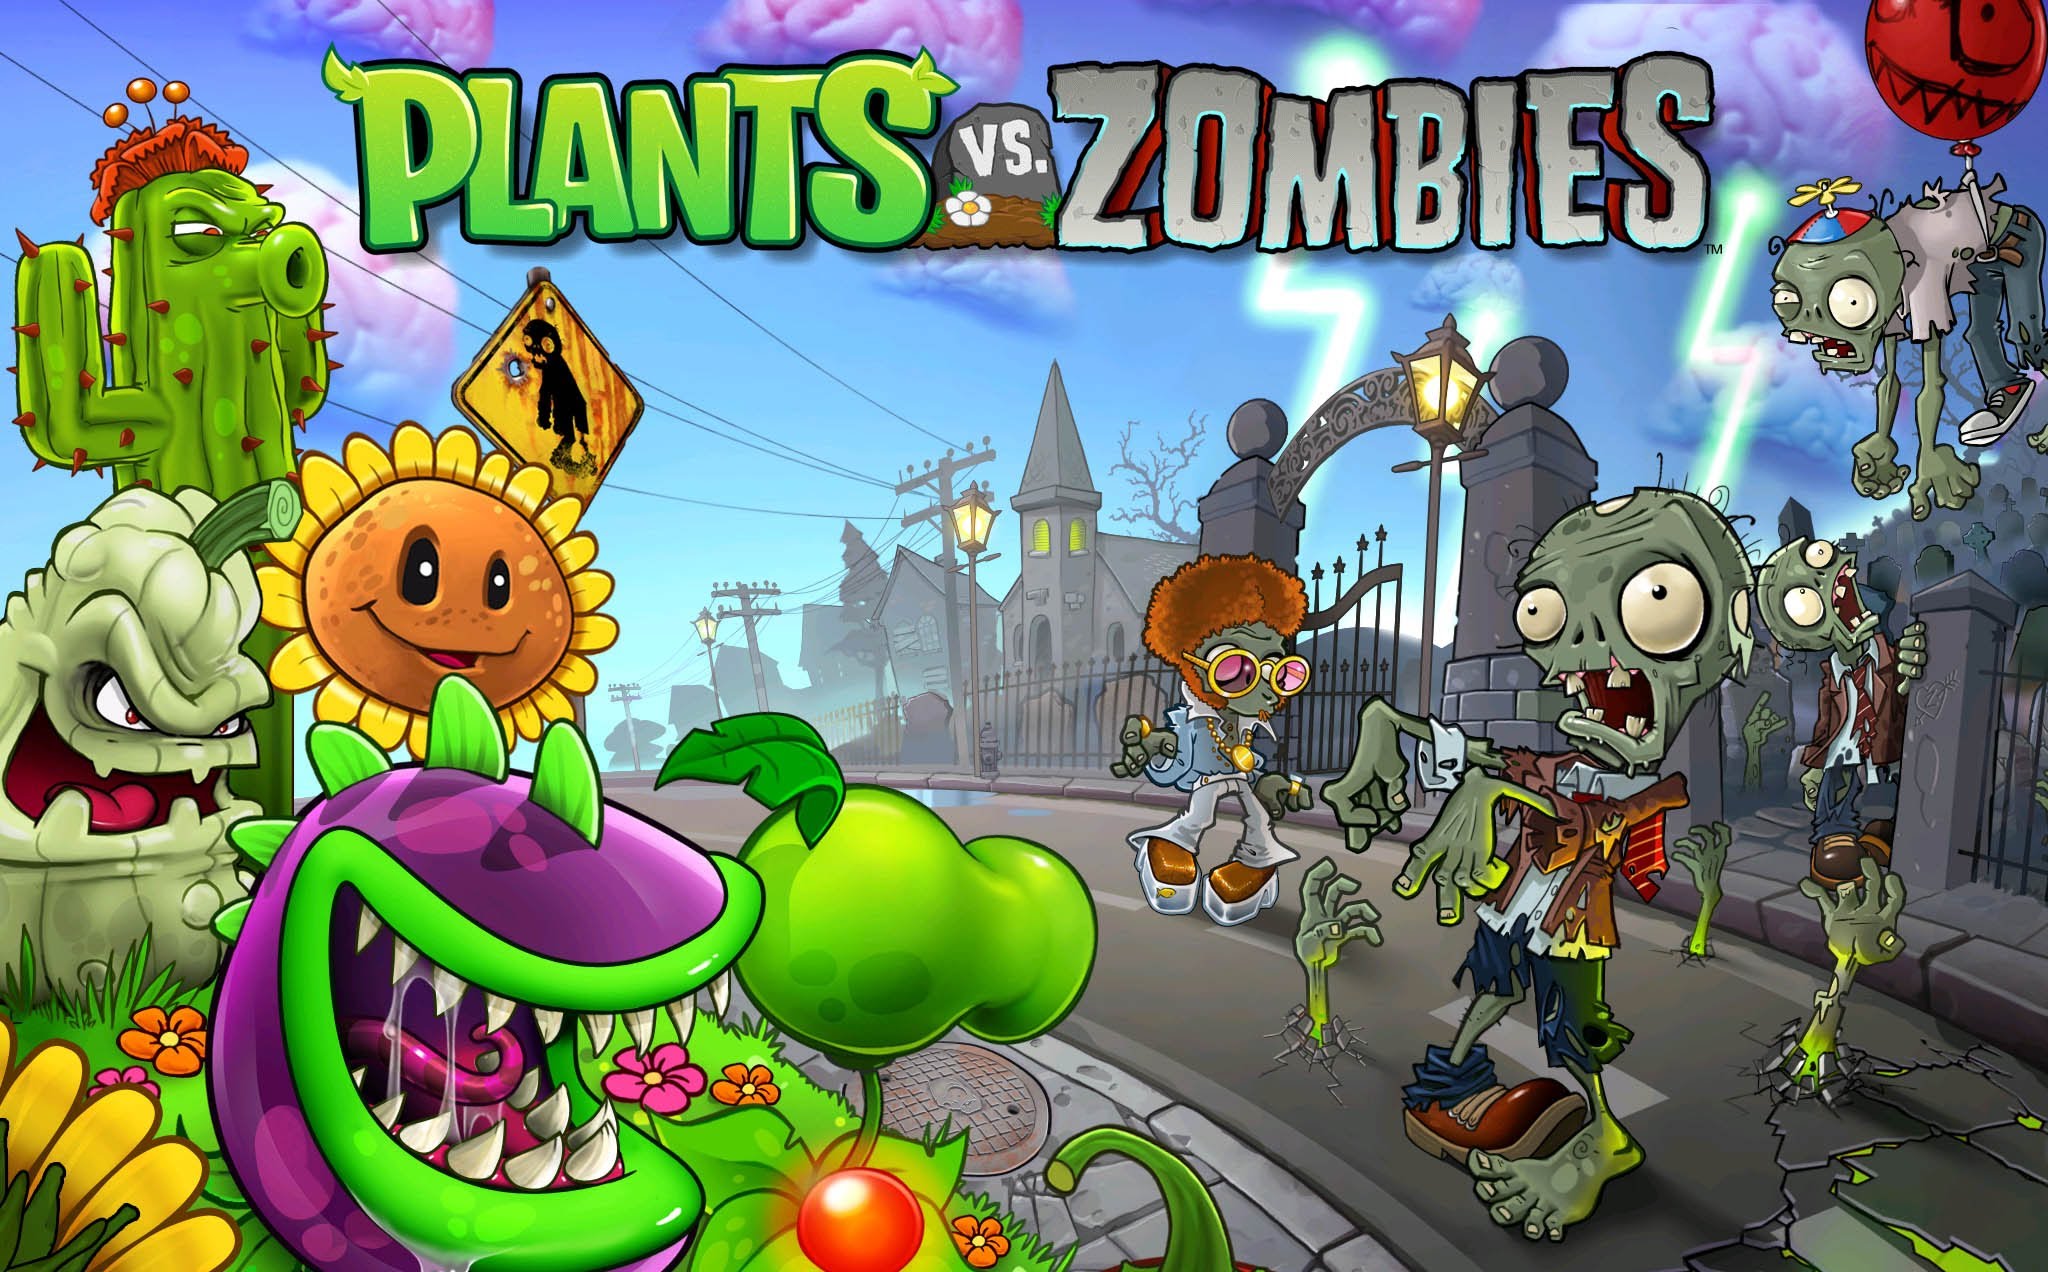 Image for Plants vs Zombies: GOTY edition is free on Origin right now